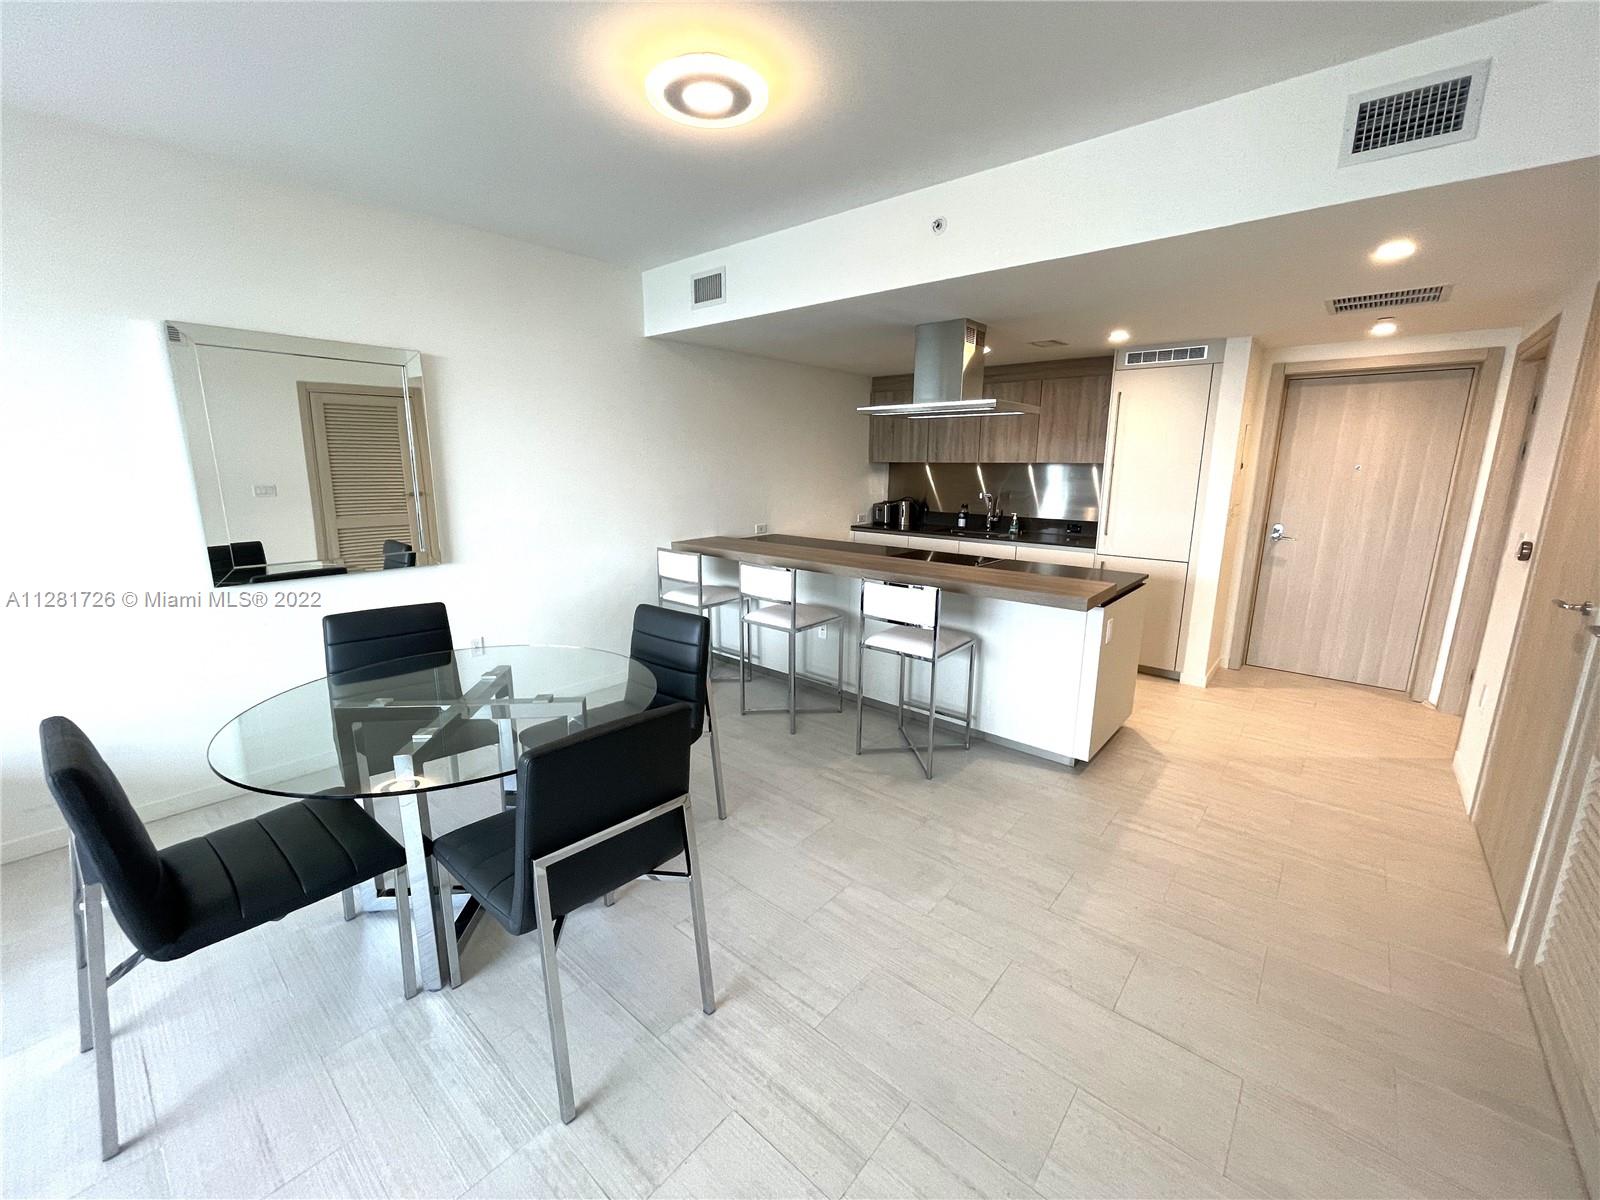 Luxury city living at its best! Fully furnished - possible 6 month lease term. This luxury condominium in Brickell rises 64 stories, enjoy beautiful Miami sunsets with unobstructed west views from floor-to-ceiling glass doors in this unit. Kitchen with fine cabinetry, porcelain floor, marble bathroom and closet with custom built-ins.  The building offers a roof top pool in the 64th floor, a rooftop spa with complete massage rooms and a high performance fitness studio and gym.  Children playroom and pool, a lap pool, private movie theater, a wine room and cellar, a social lounge, a billiard room.  Full time doorman and concierge.  Complimentary valet parking.